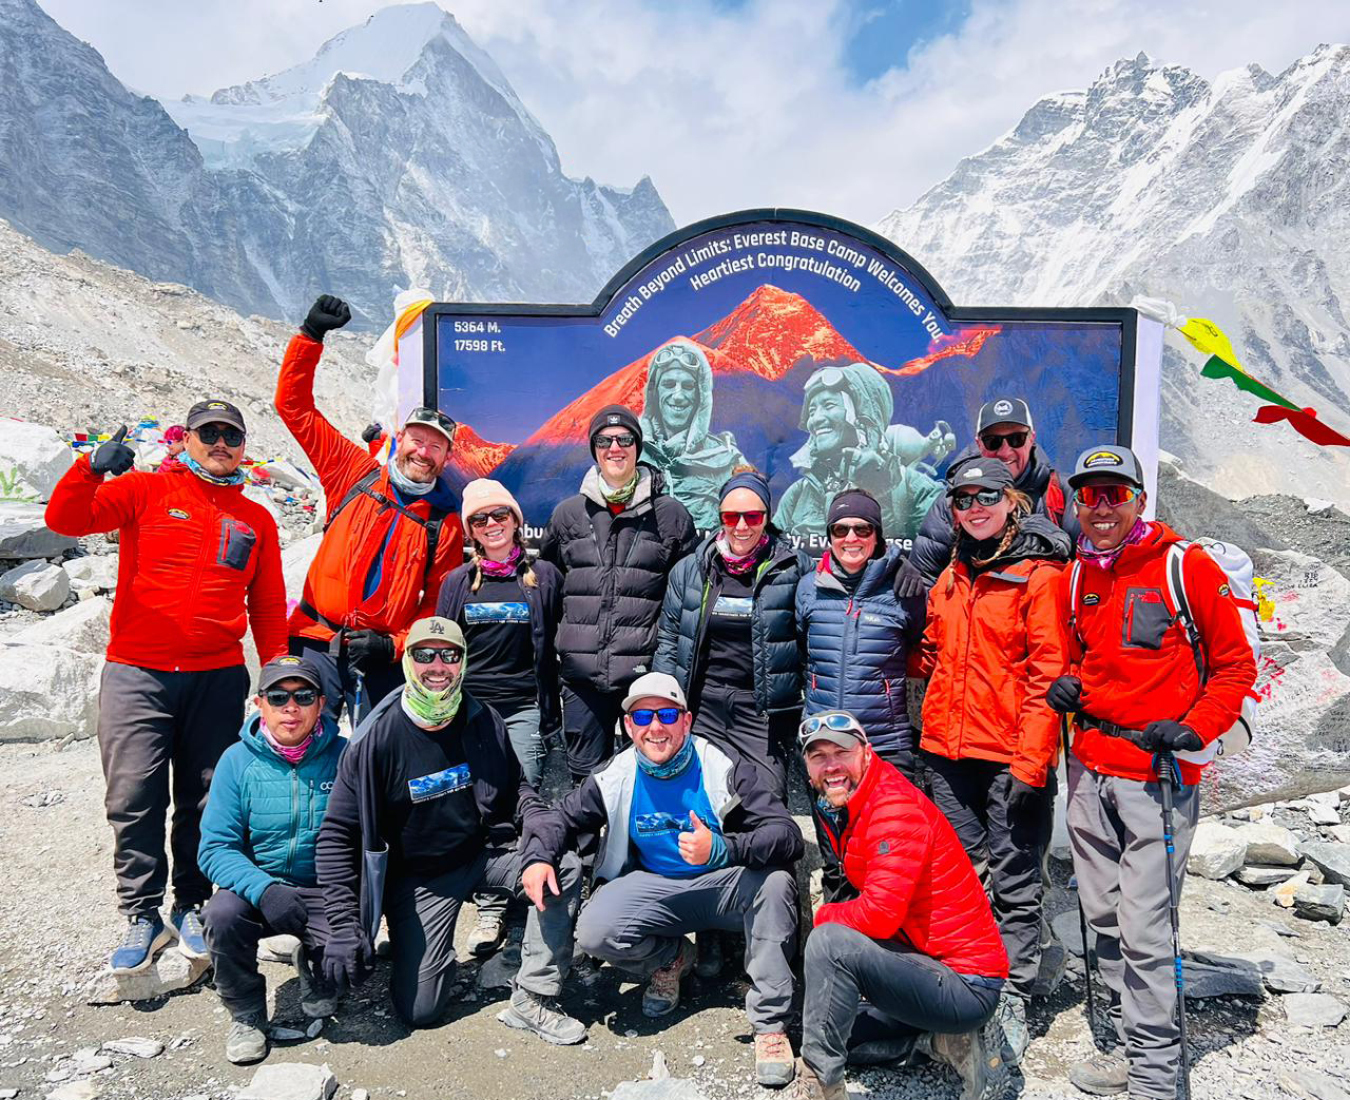 The AC Everest Base Camp Trek #1 team stand at the entrance to EBC, all smiles having reached their goal.